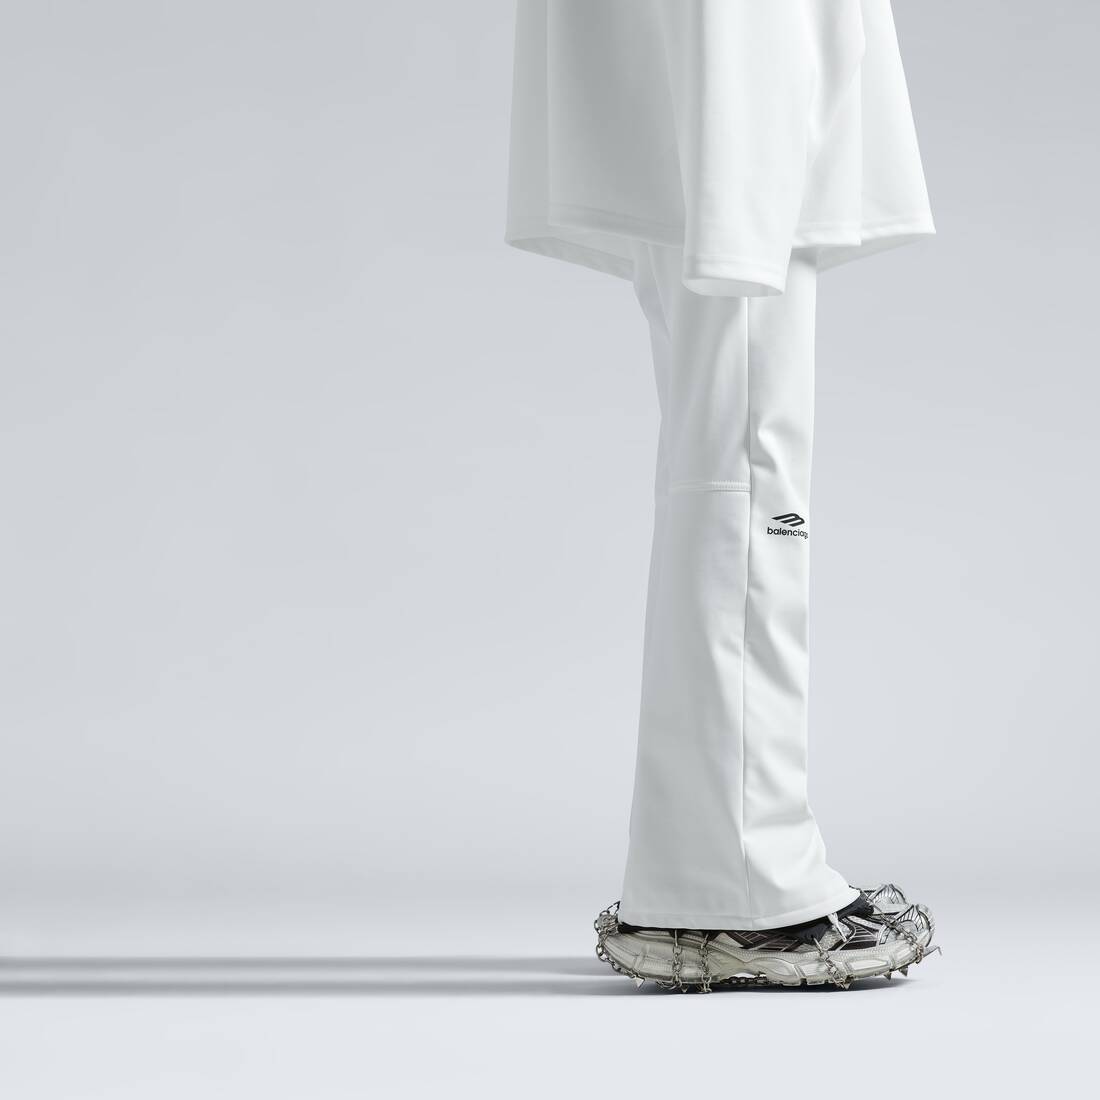 Nike Performance Trousers for Men - Shop Now on FARFETCH